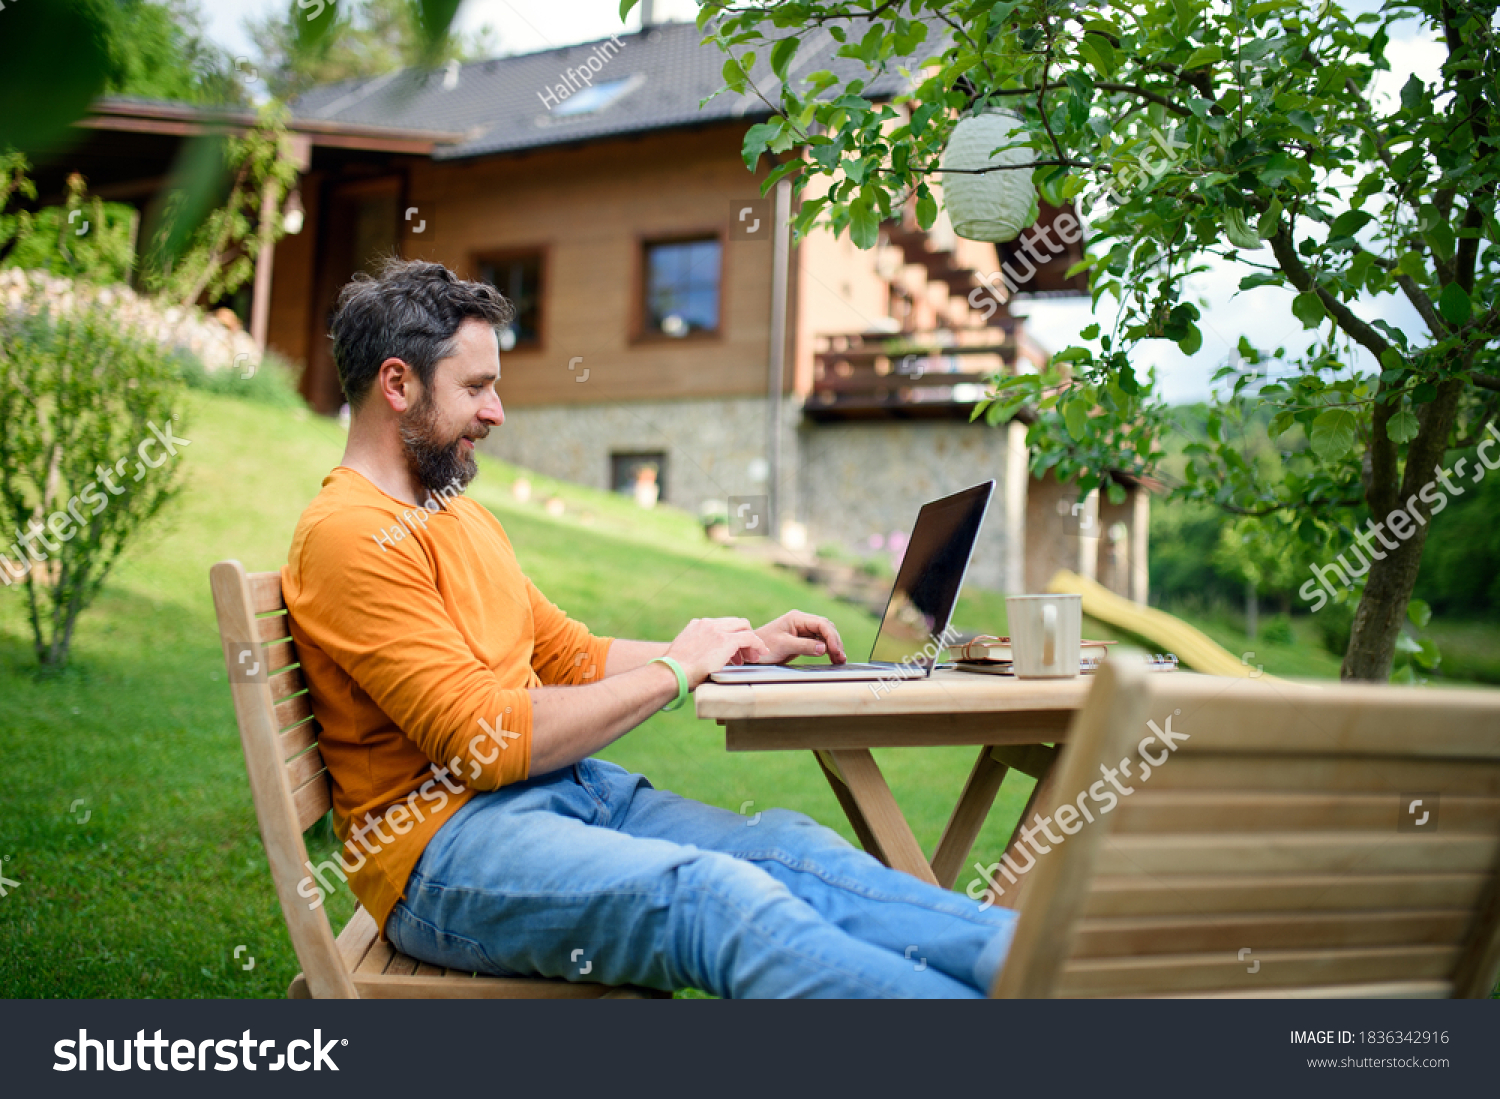 Side view of man with laptop working outdoors in garden, home office concept. #1836342916